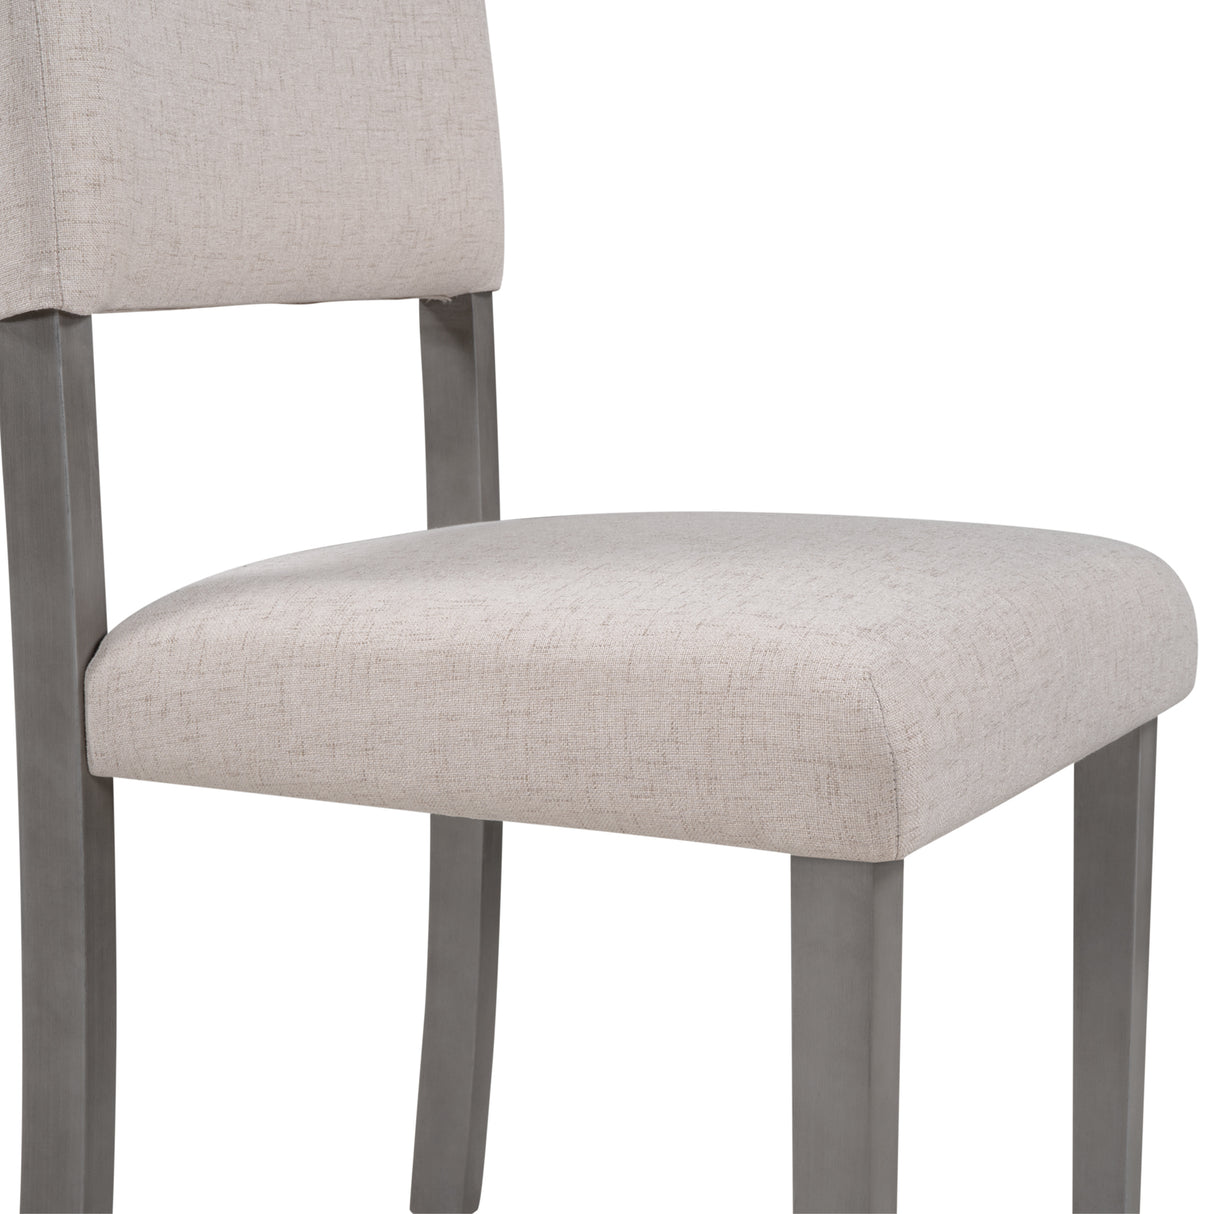 TOPMAX Mid-Century Wood 4 Upholstered Dining Chairs for Small Places, Beige - Home Elegance USA